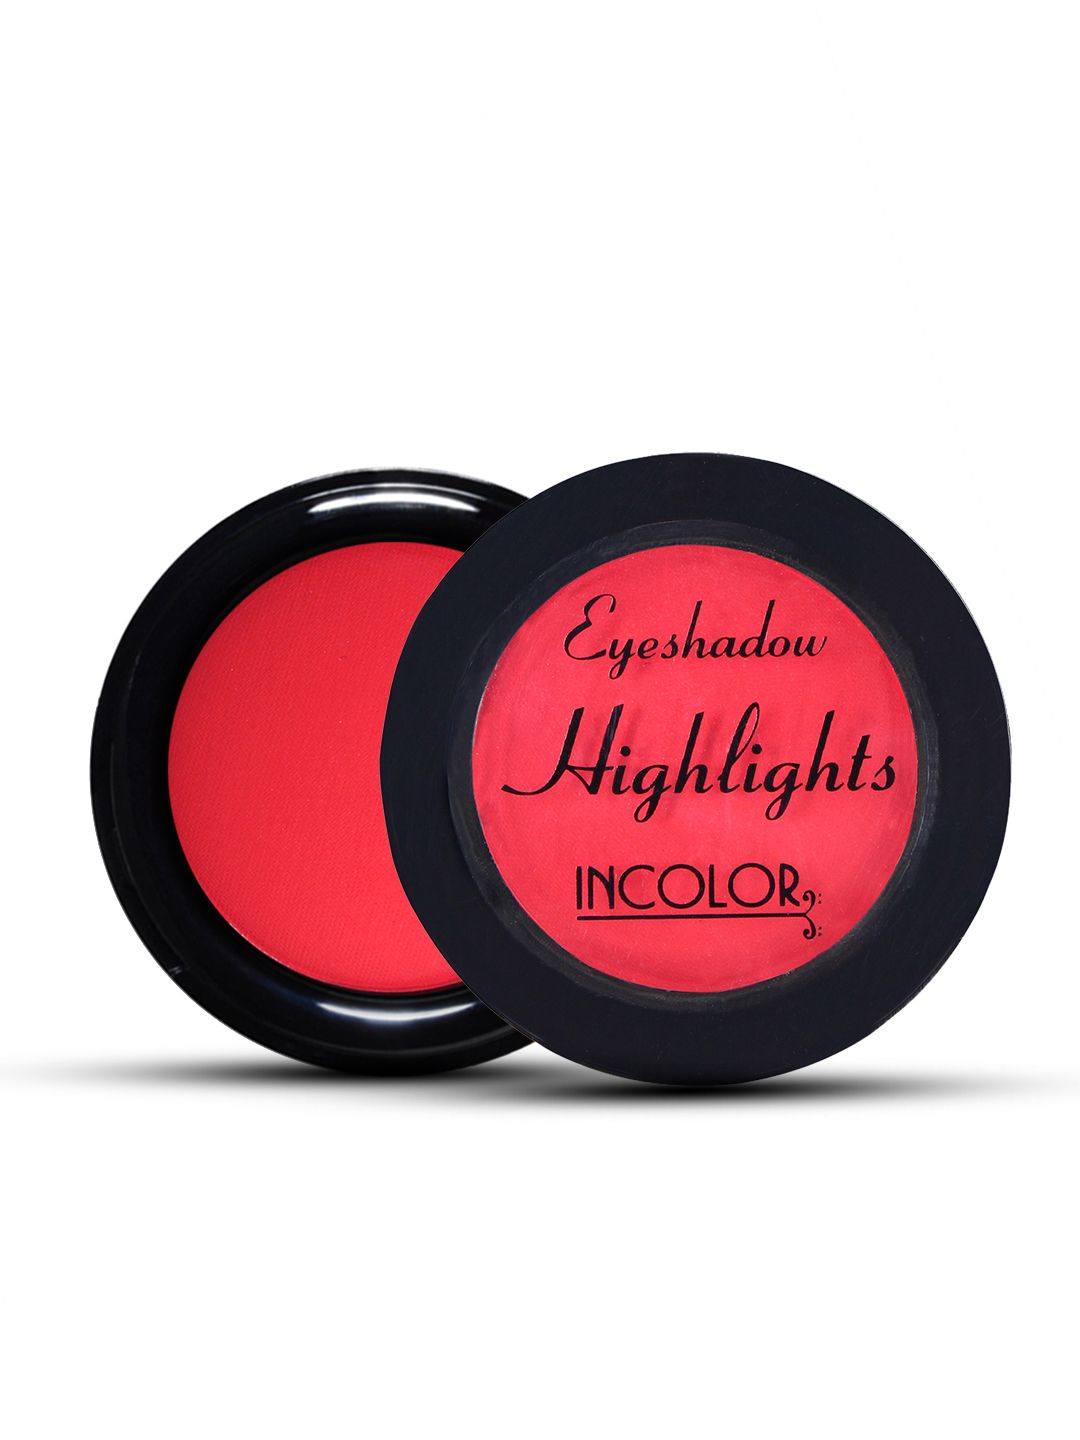 INCOLOR Peach-Coloured Highlight Eyeshadow 16 4.5 gms Price in India